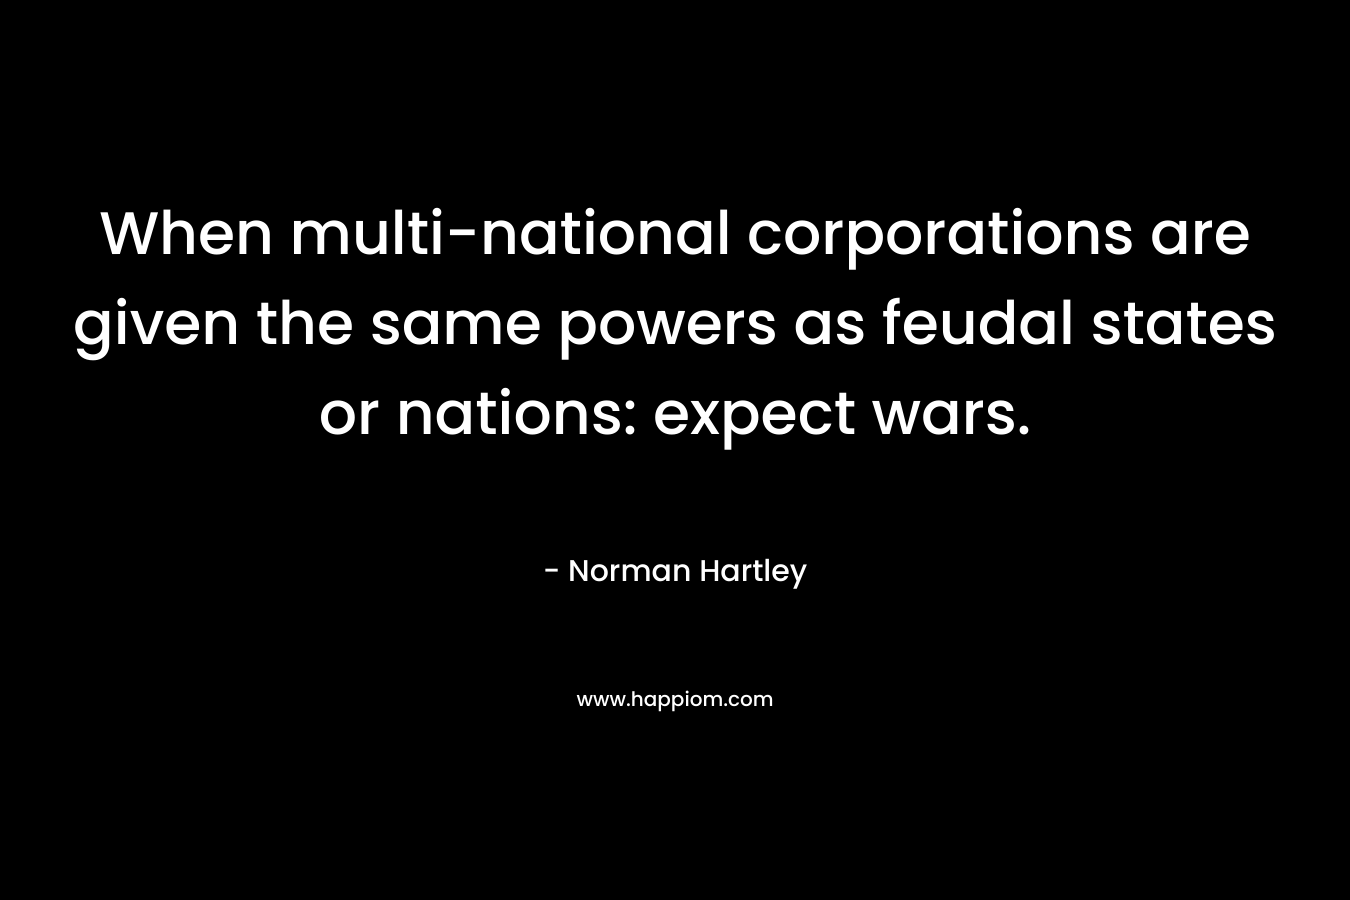 When multi-national corporations are given the same powers as feudal states or nations: expect wars. – Norman Hartley